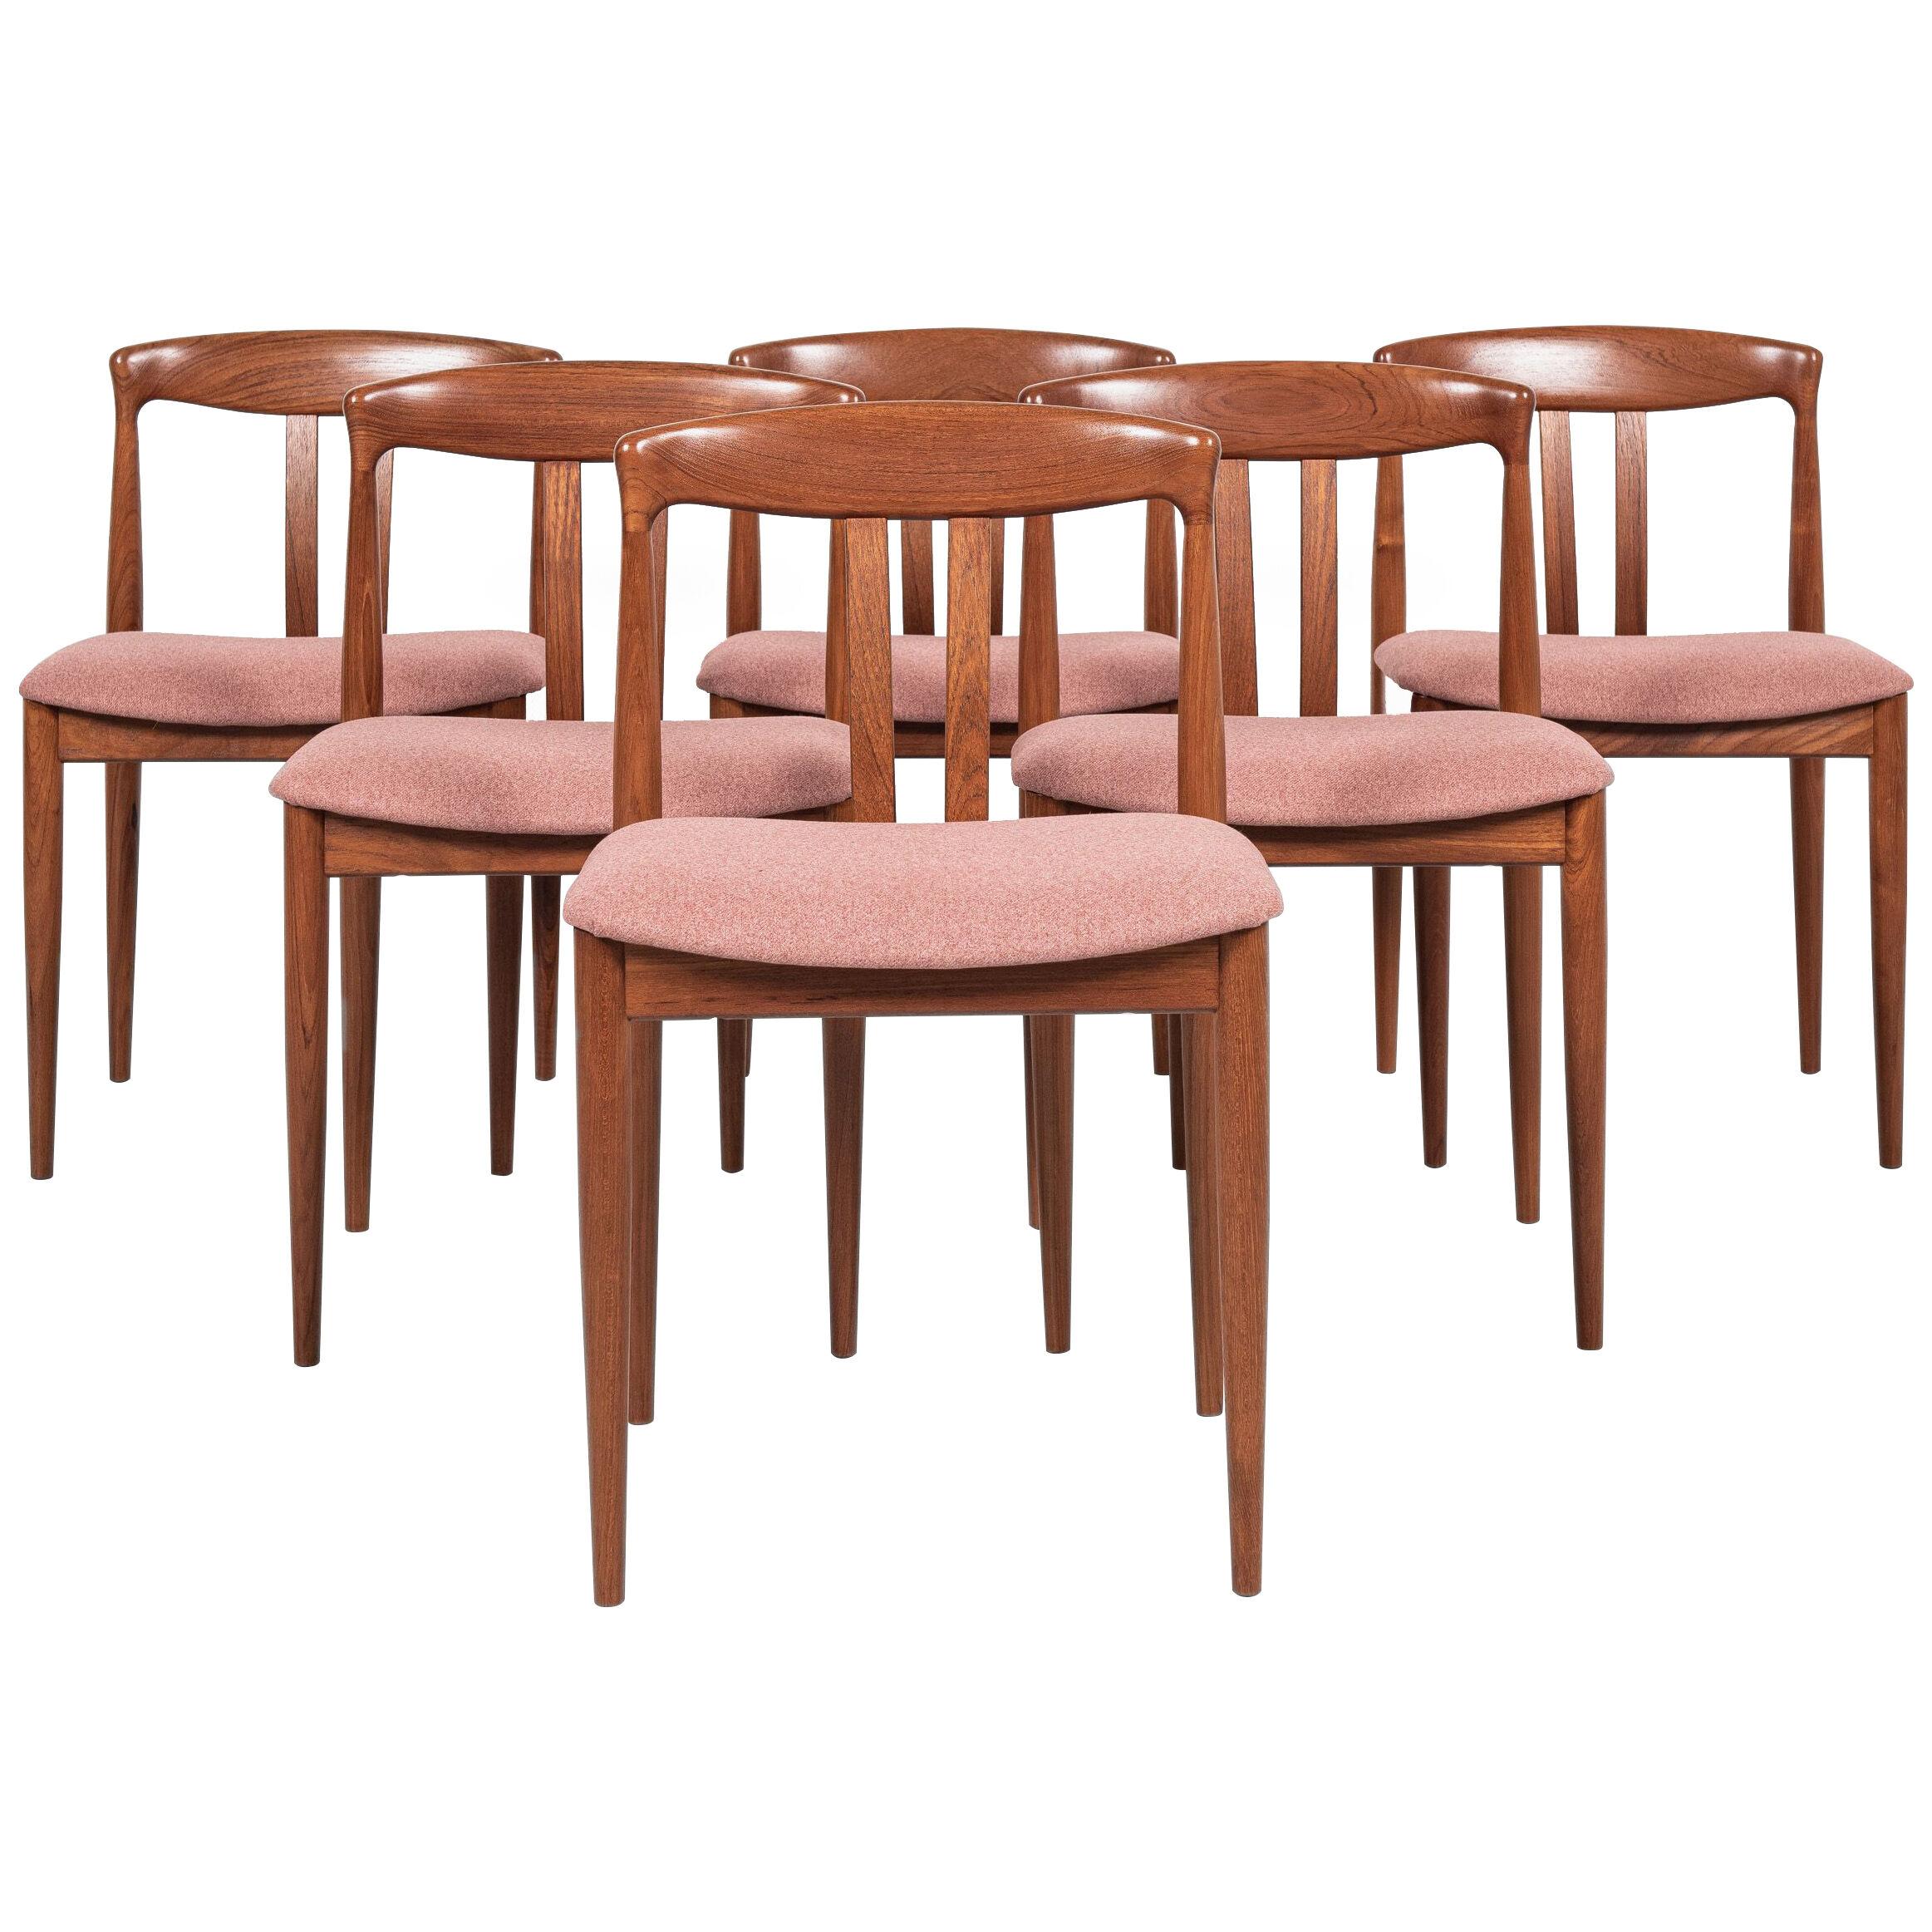 Midcentury Danish set of 6 dining chairs in teak and new pink fabric 1960s